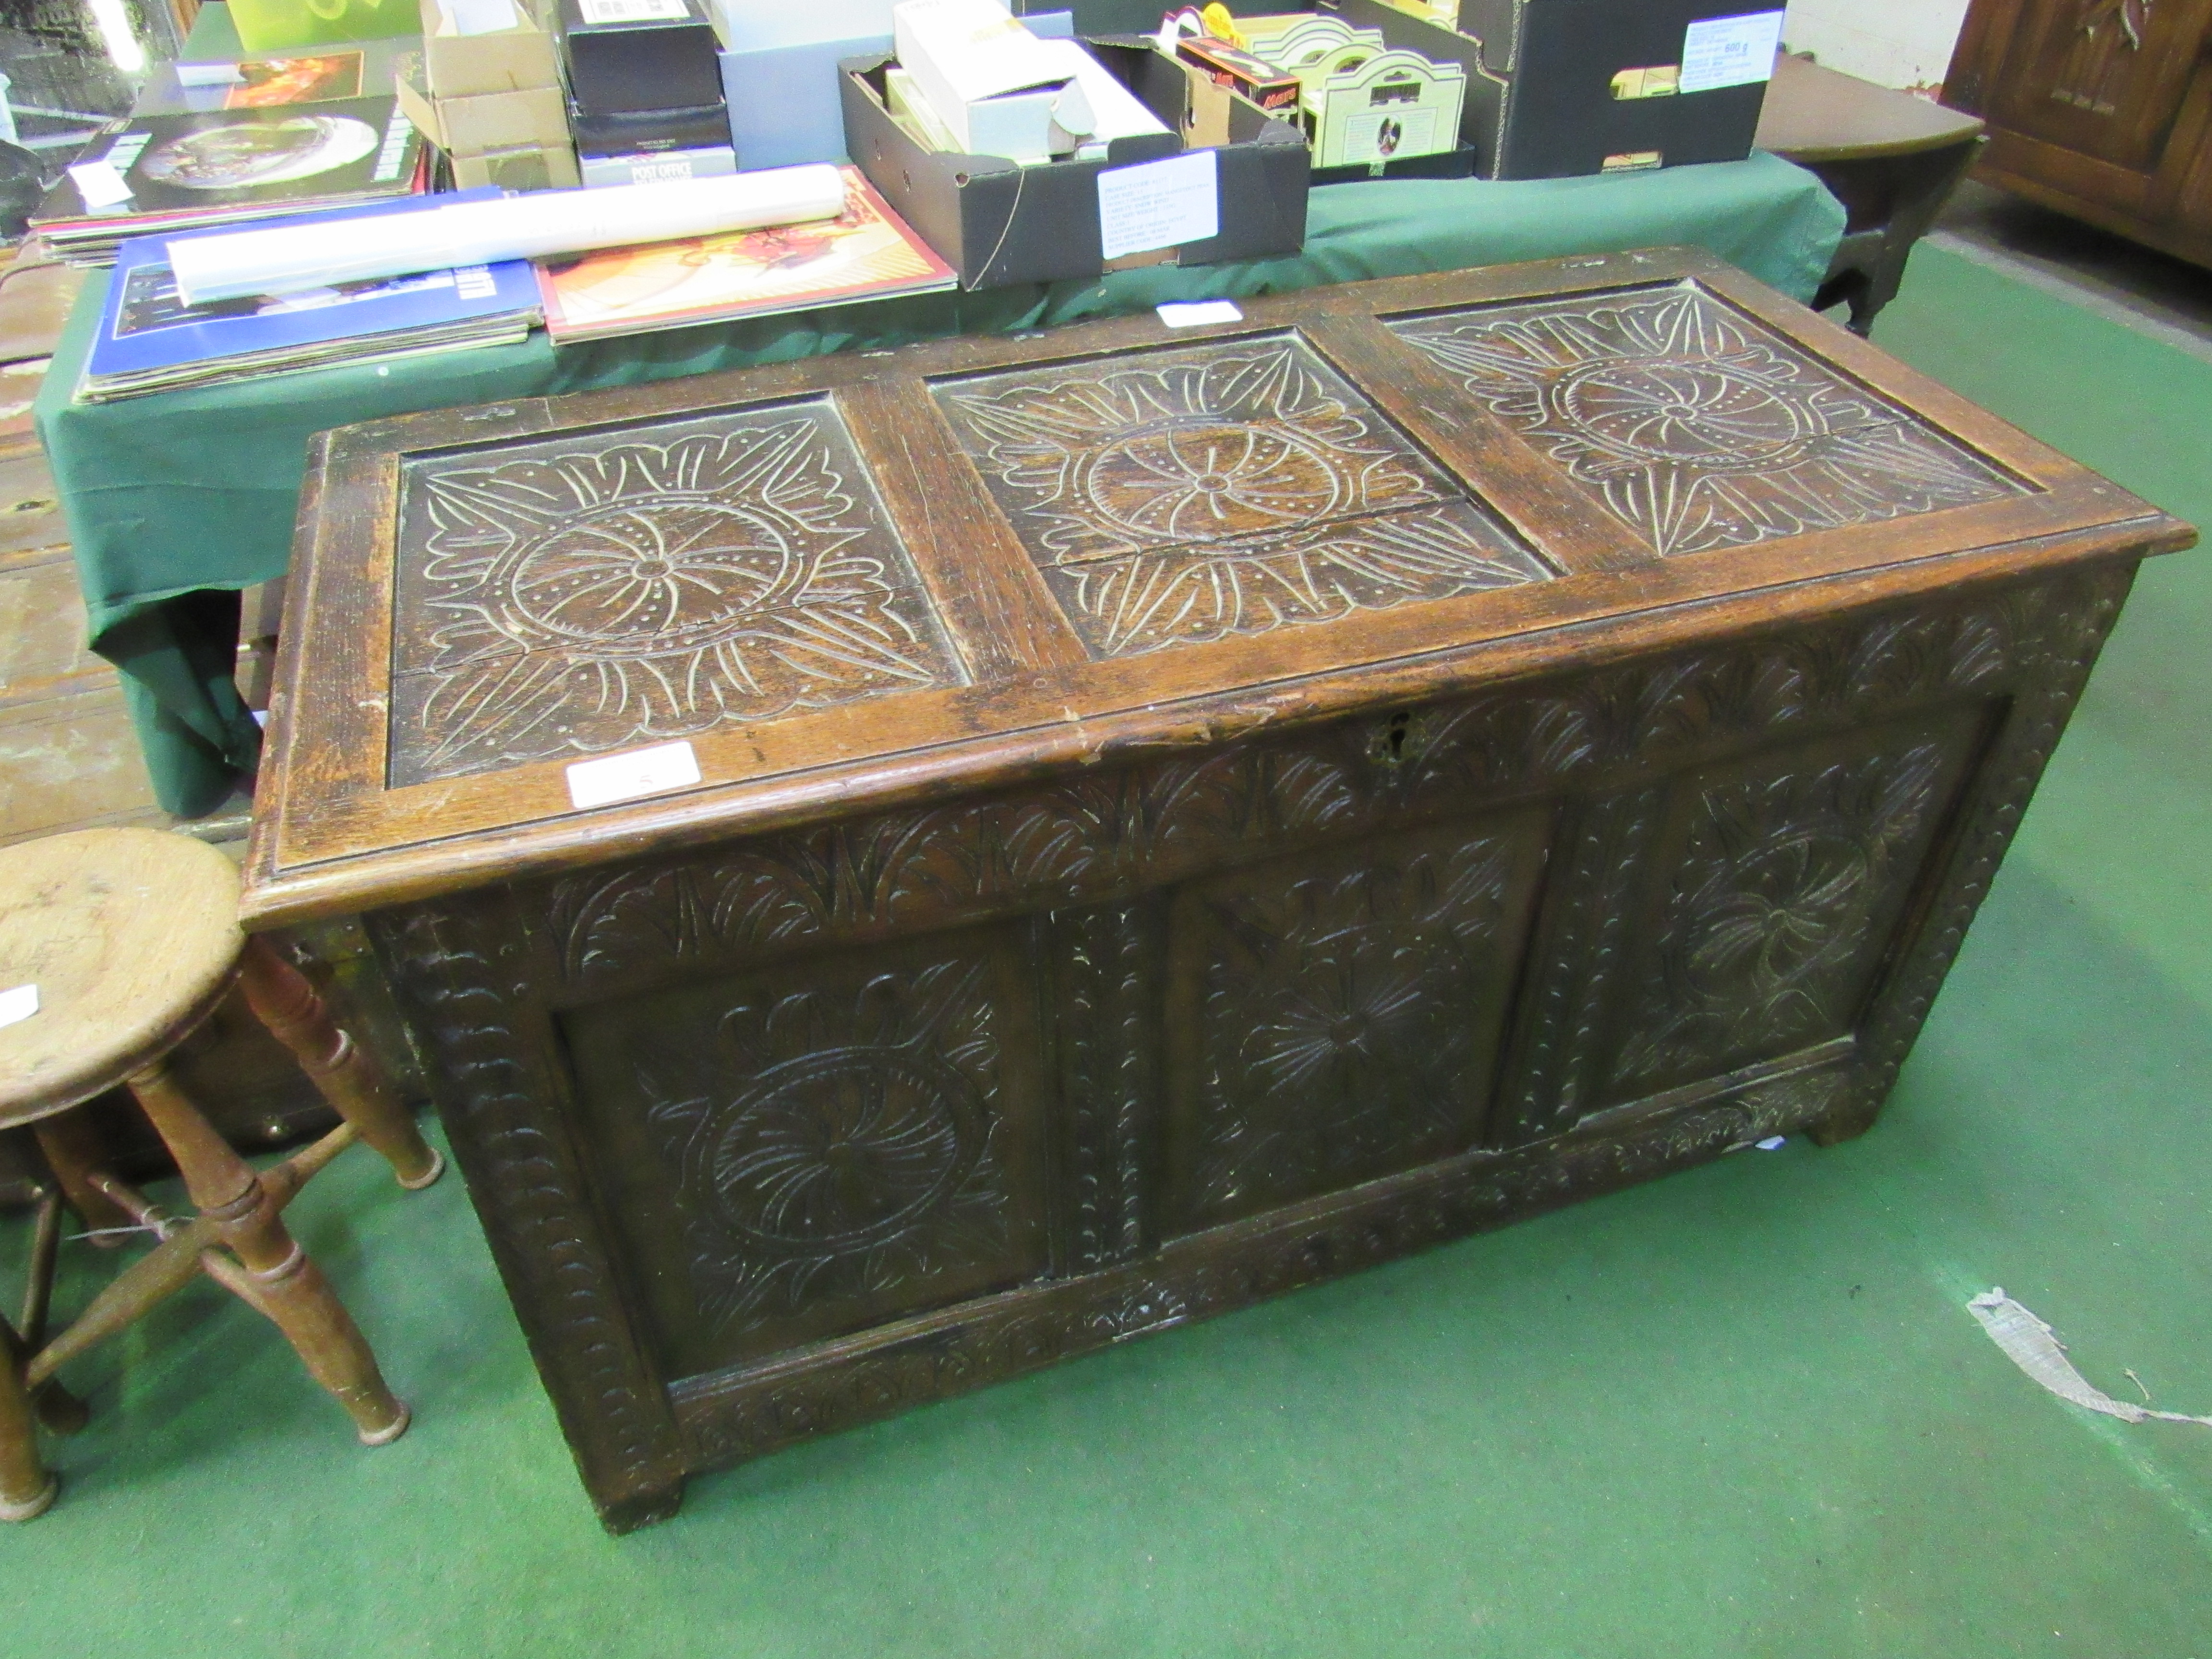 18th Century carved panel chest, as found. 123 x 56 x 66cms. Estimate £40-60.